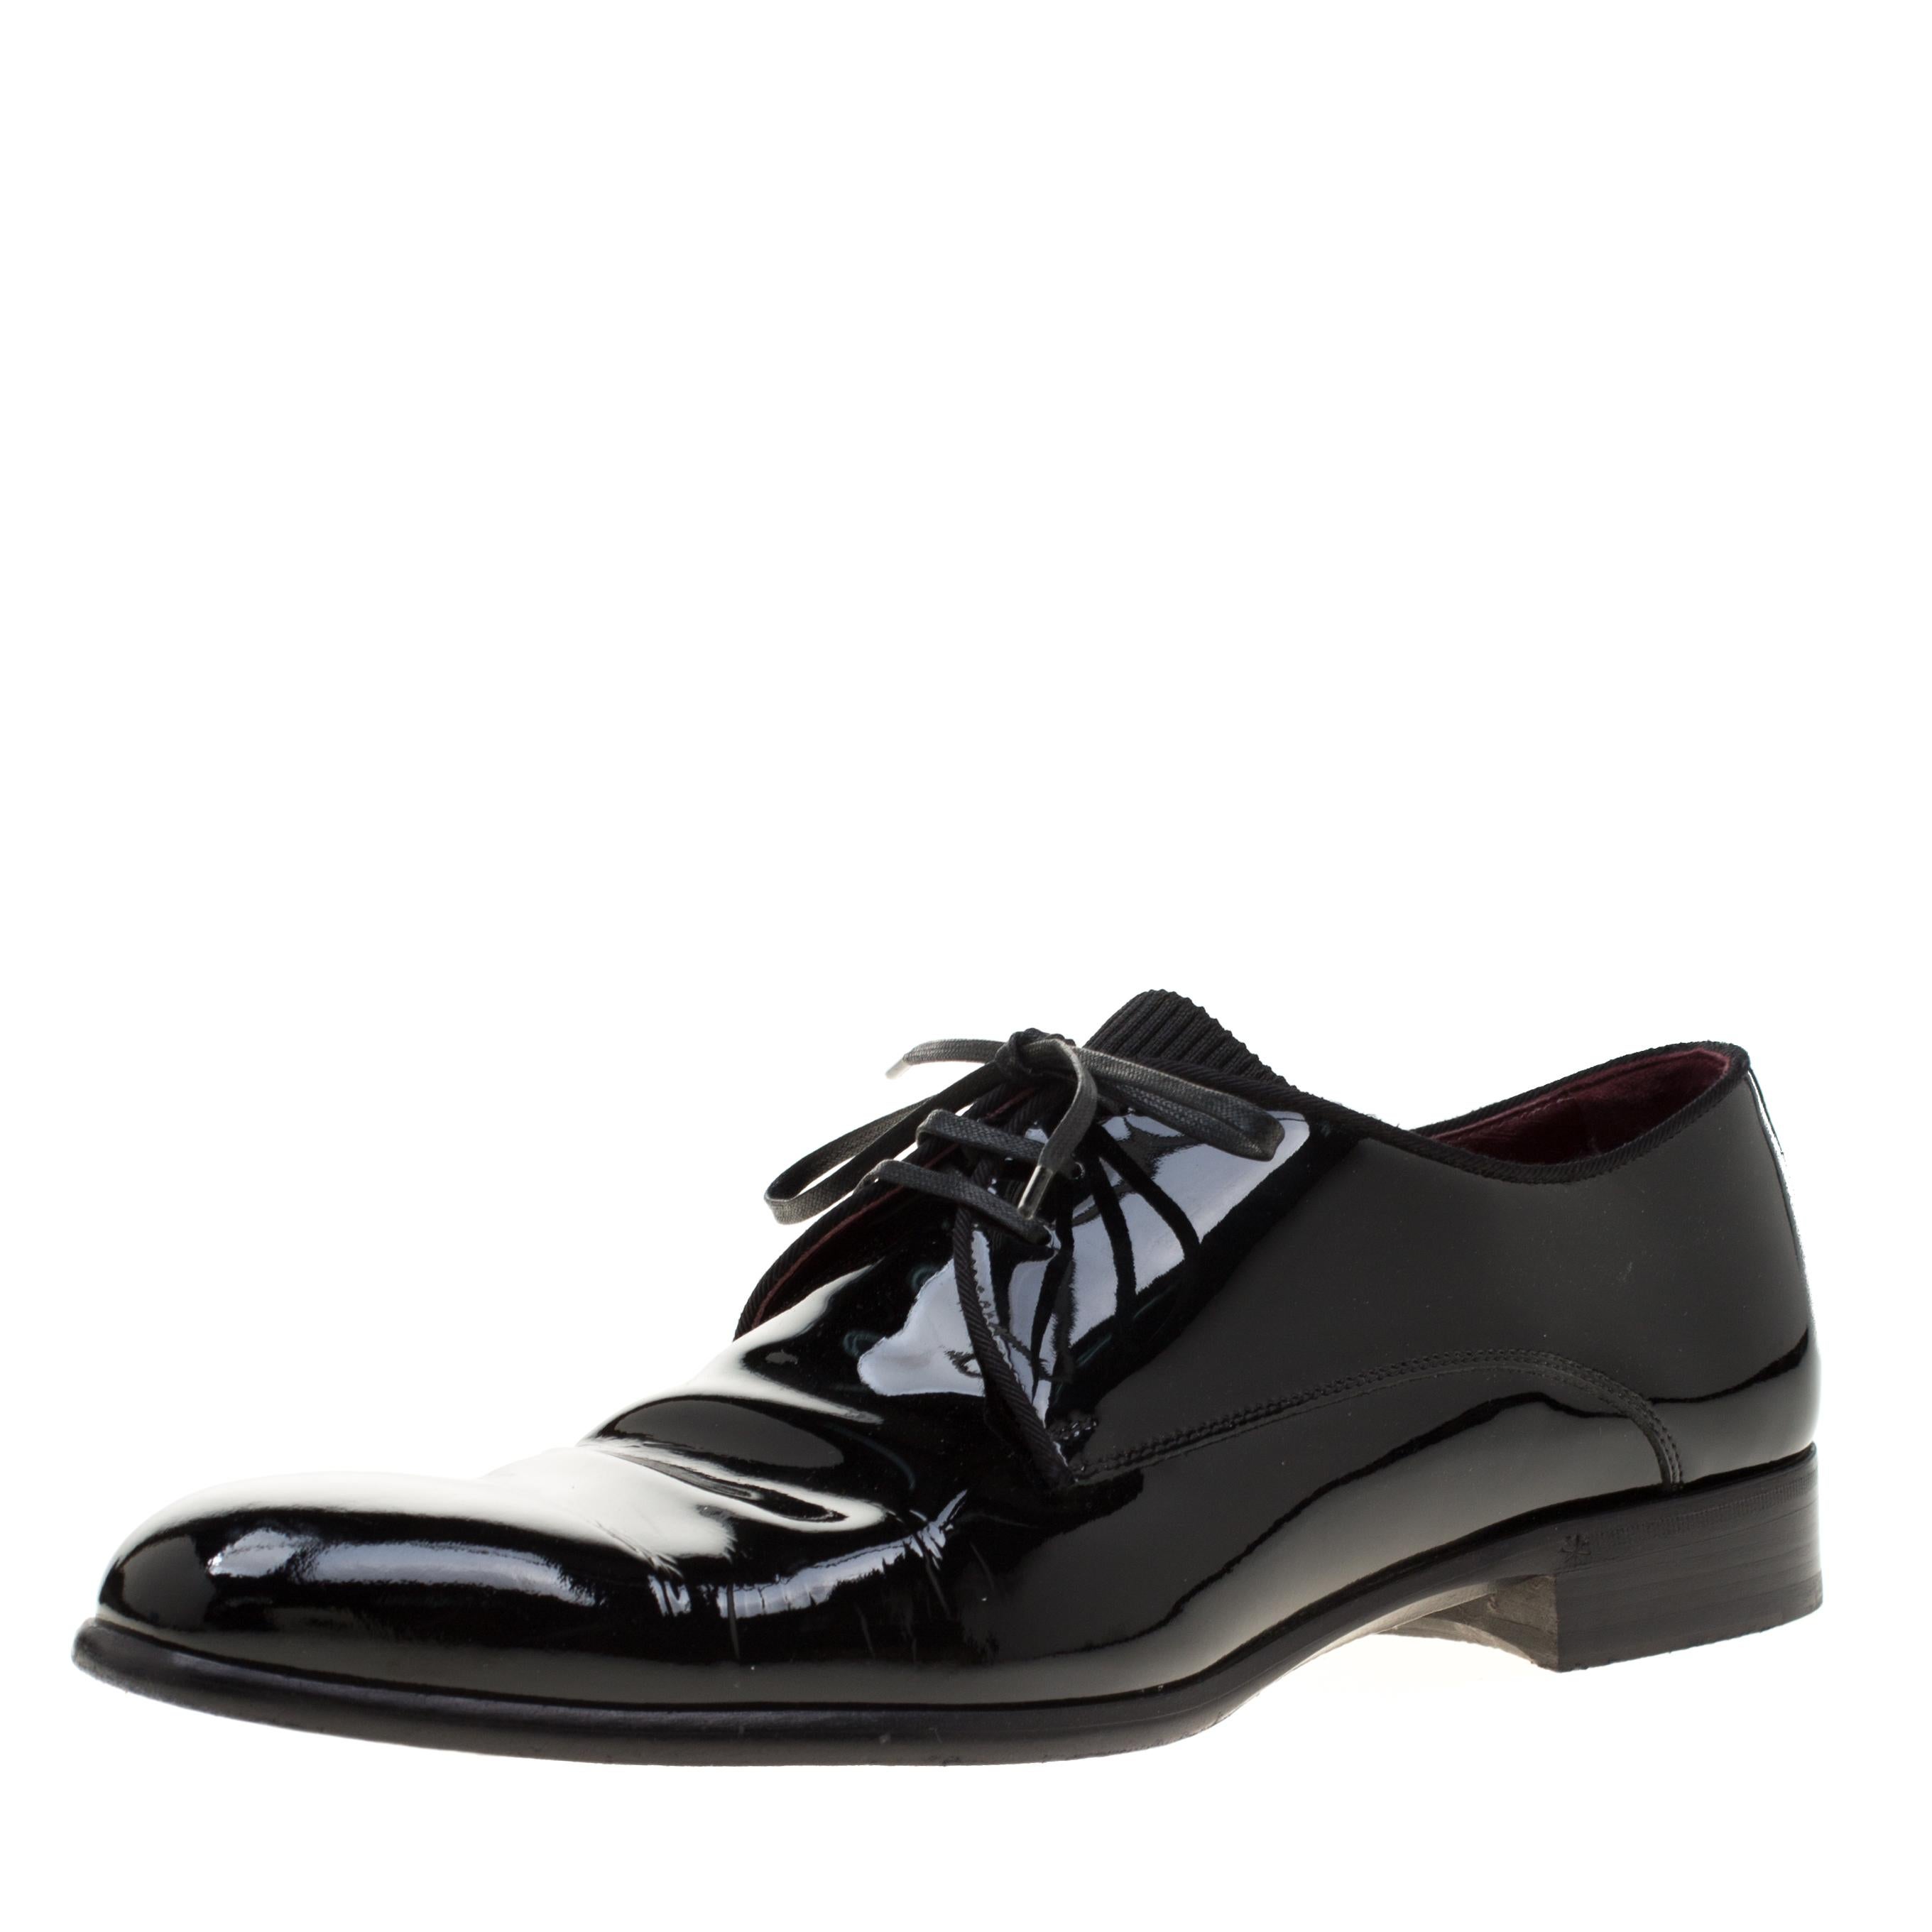 These Dolce and Gabbana shoes bring a refined look! The pair is expertly crafted from black patent leather and feature lace-ups on the vamps and comfortable insoles. Pair them with a plain shirt, slim fit trousers and a double-breasted blazer for a